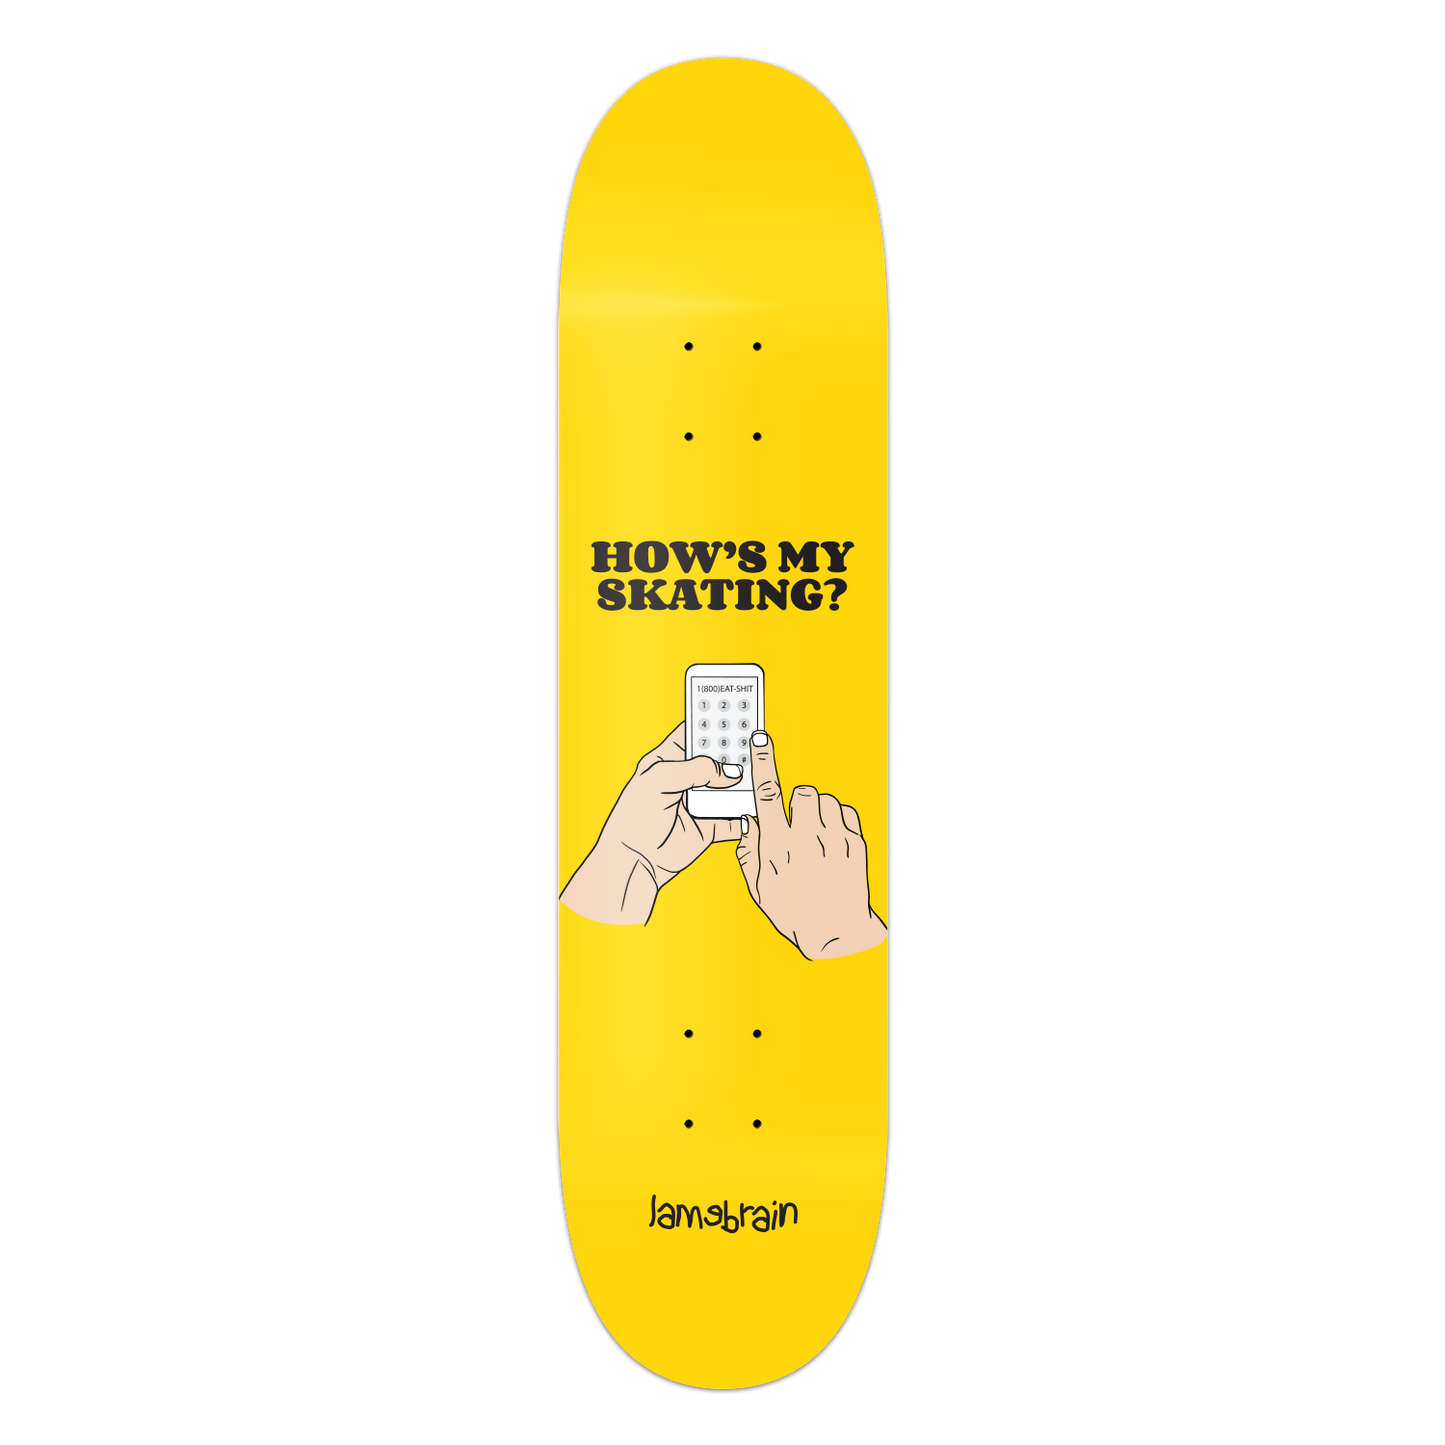 yellow skateboard with cartoon hands dialing a phone number 1-800-eatshit and writing above it says how's my skating